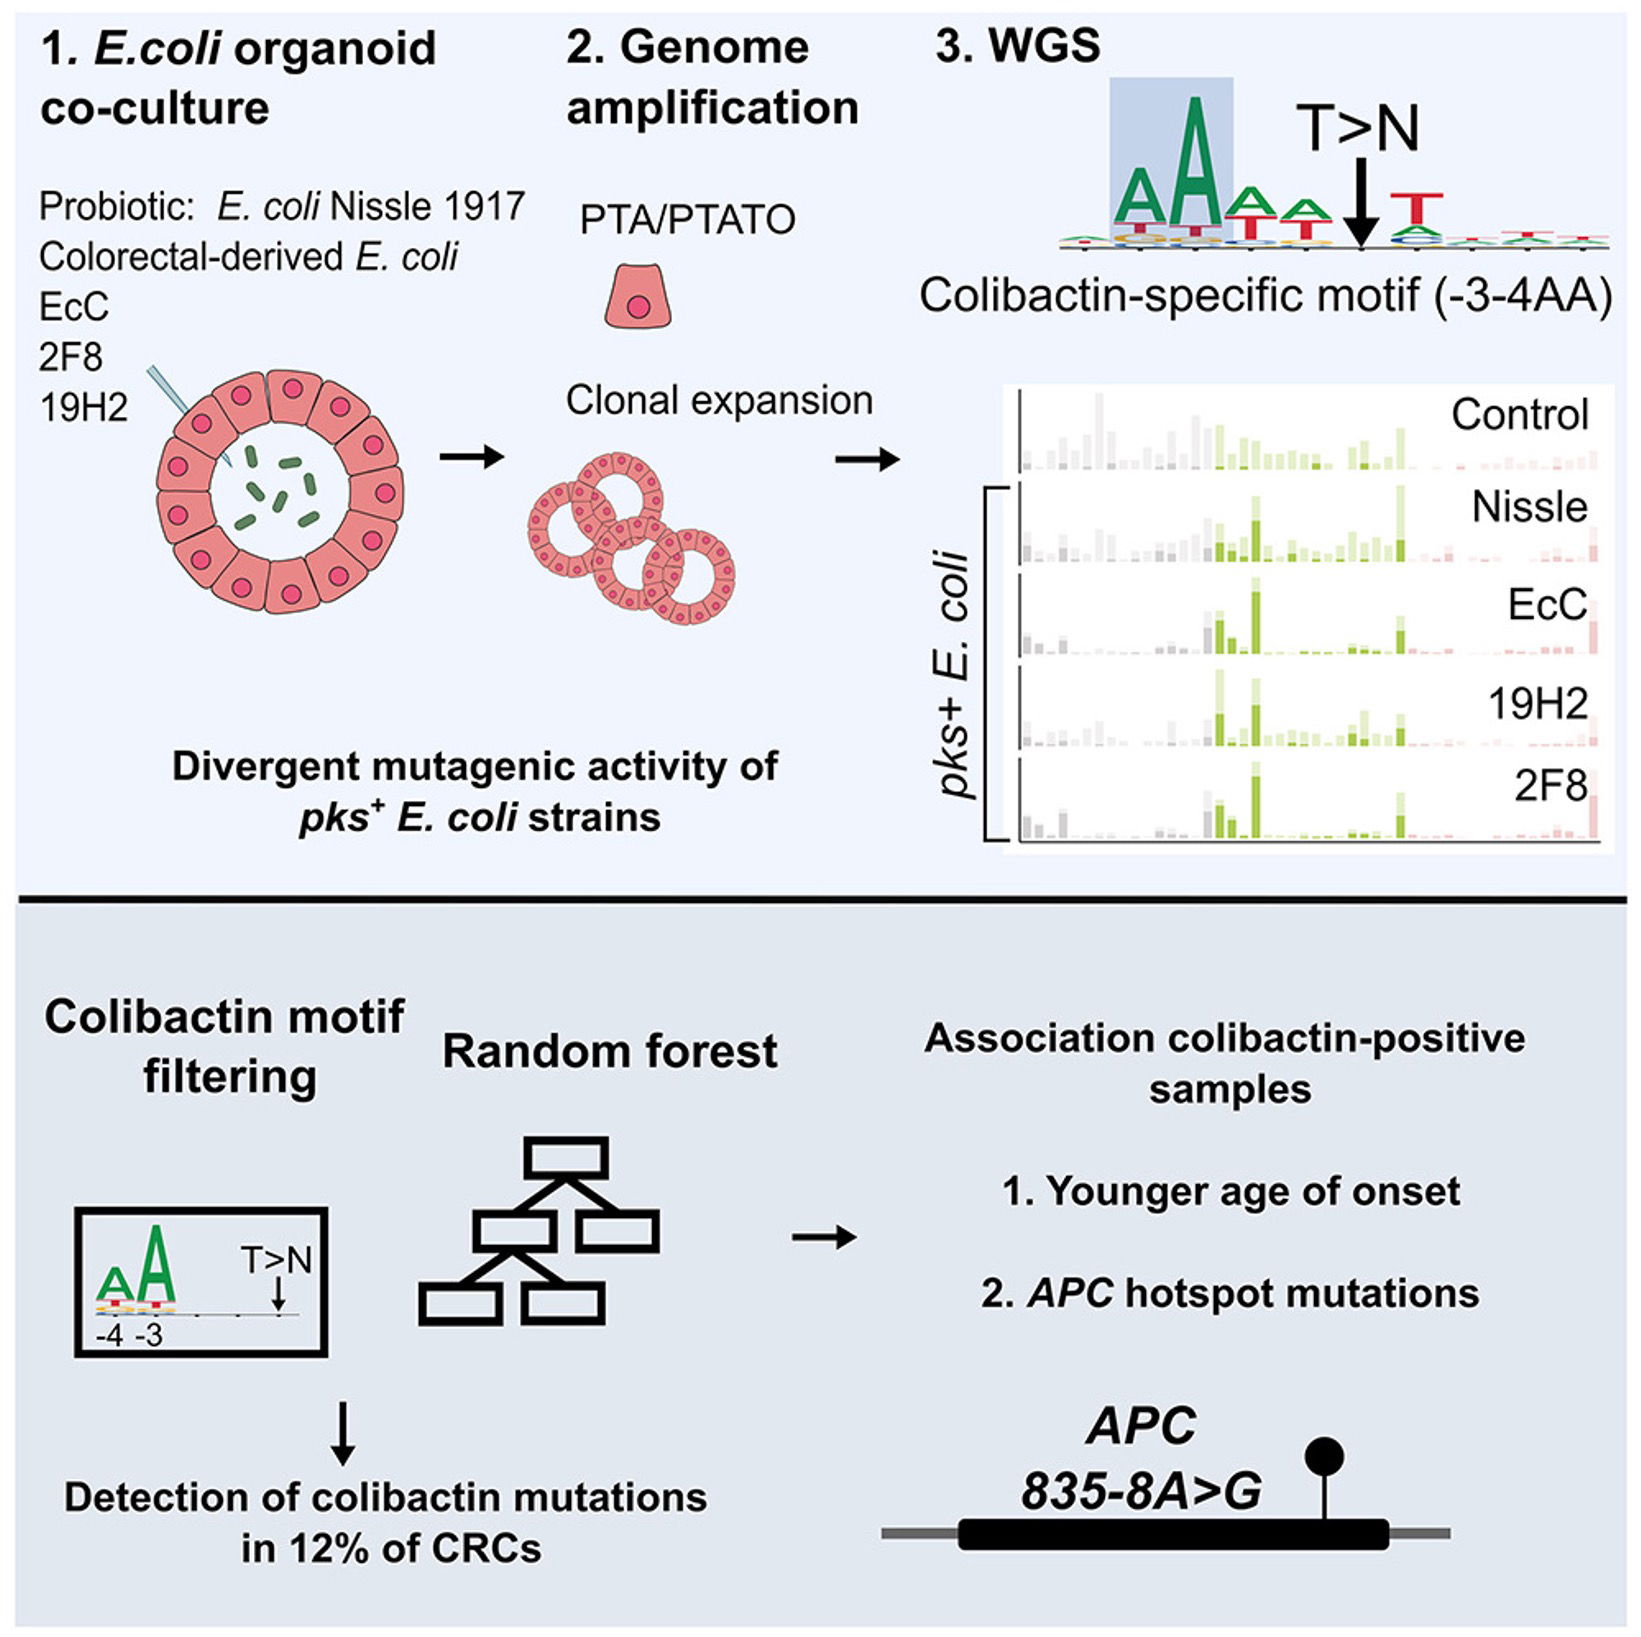 Improved detection of colibactin-induced mutations by genotoxic E. coli in organoids and colorectal cancer